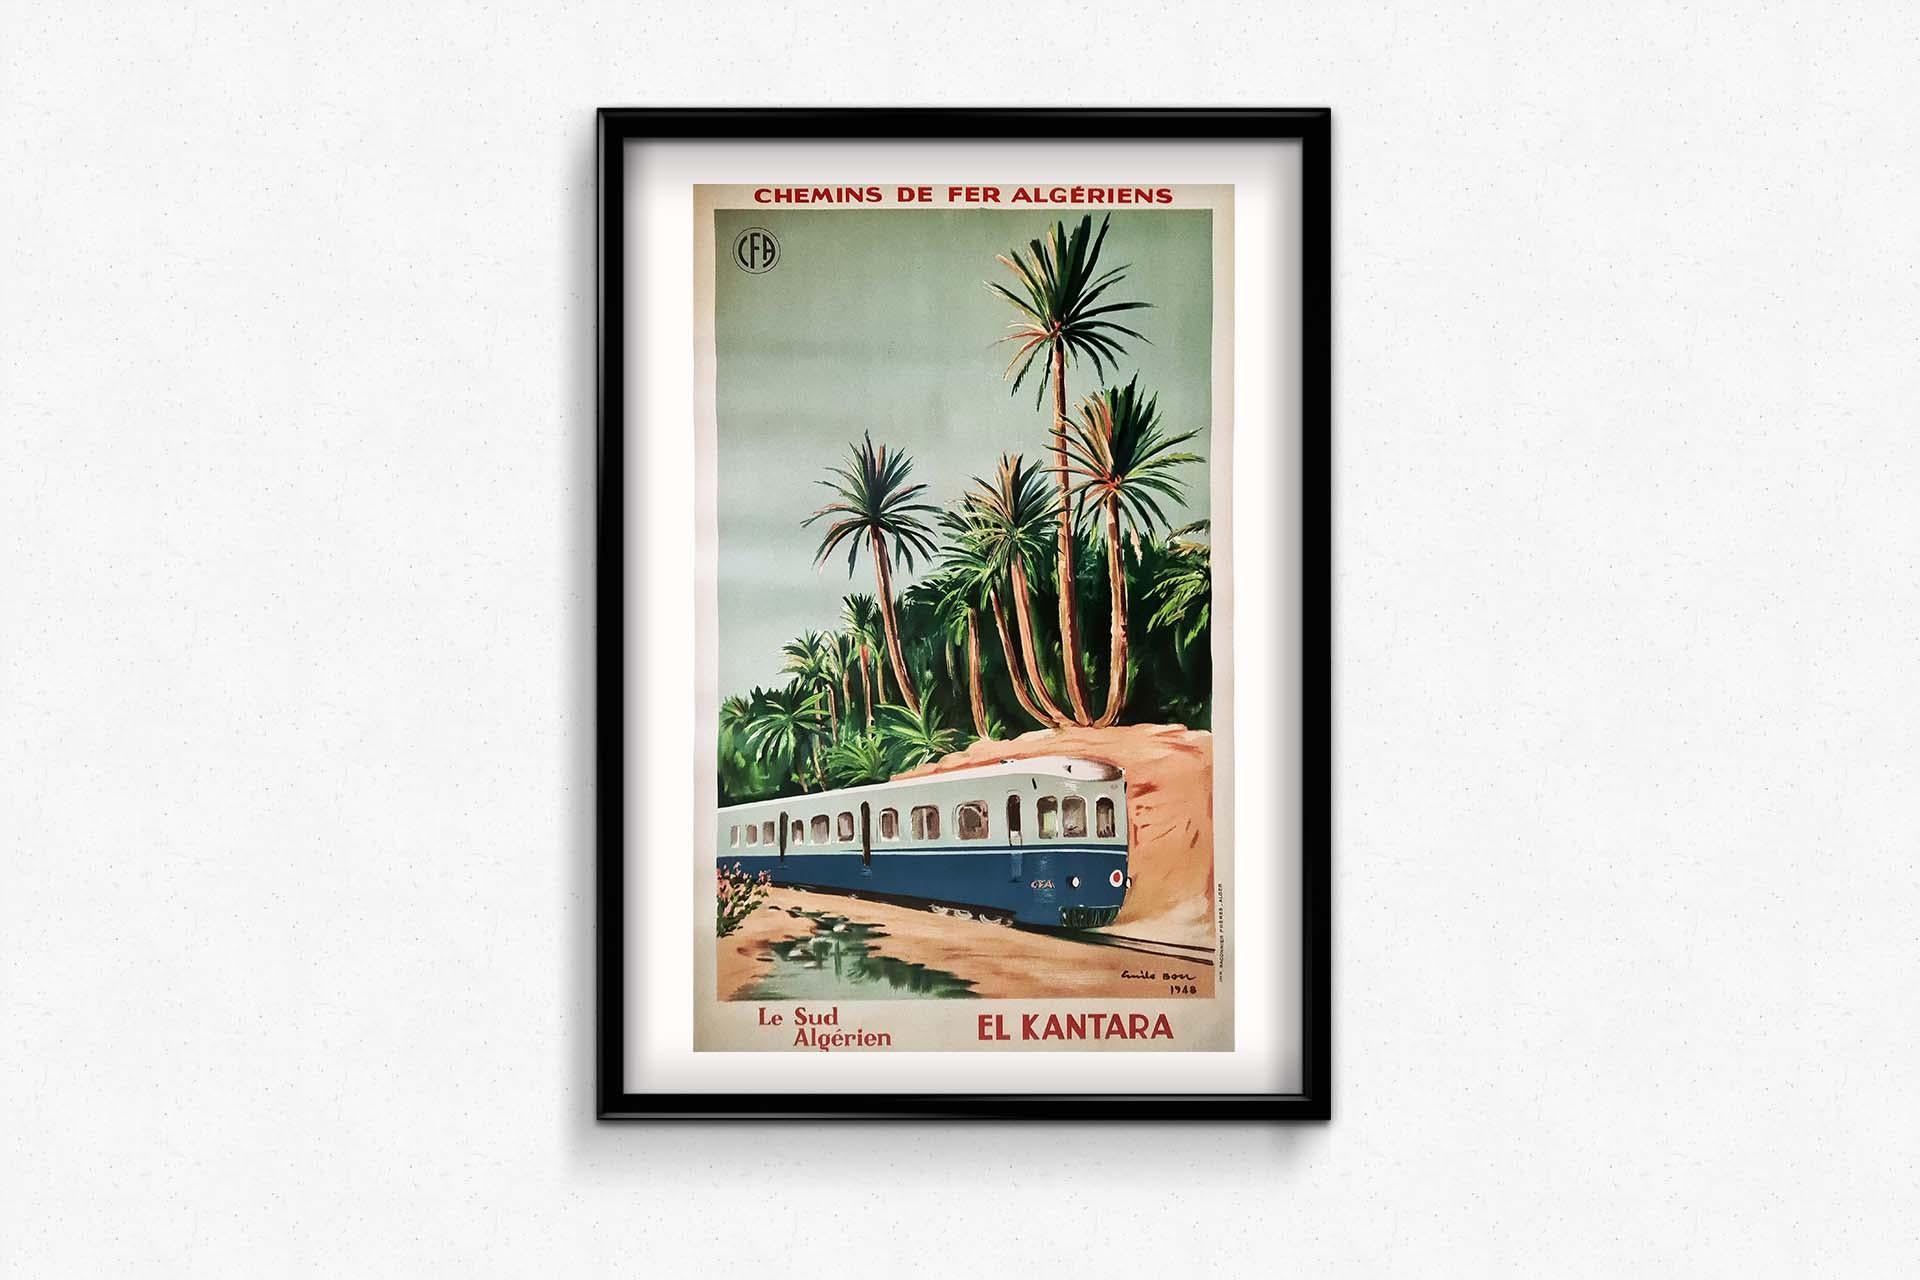 Beautiful poster of Emil Bon for the Algerian railroads, towards the Sahara passing by the famous canyon of El Kantara. El Kantara is a town and commune in the province of Biskra, Algeria. The 1911 Baedeker travel guide describes it as 